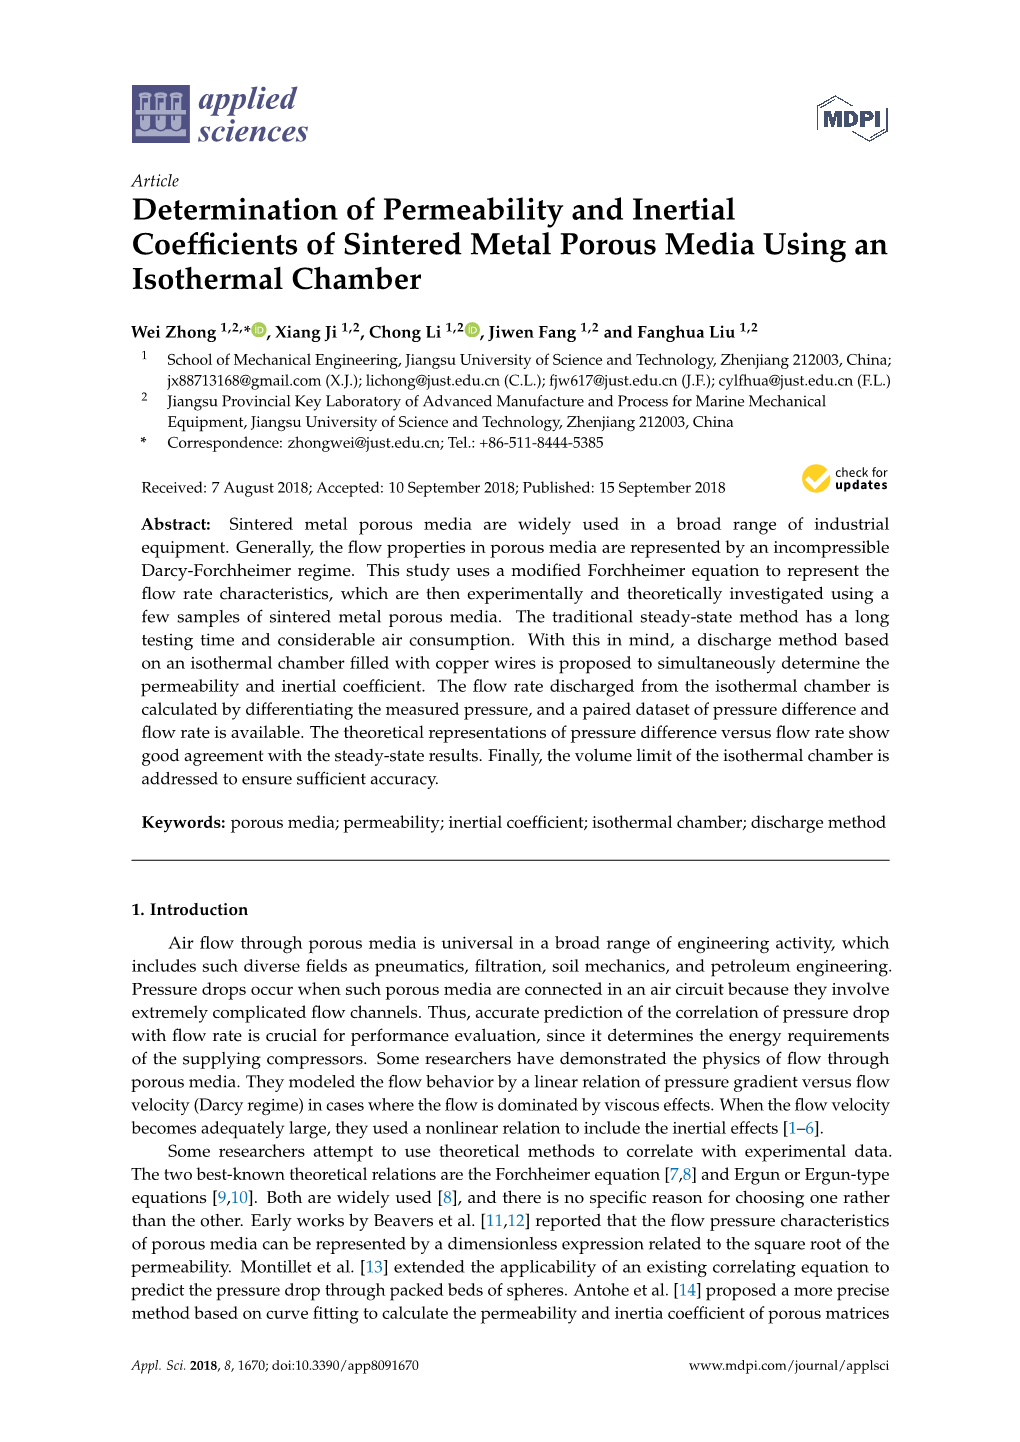 Determination of Permeability and Inertial Coefficients of Sintered